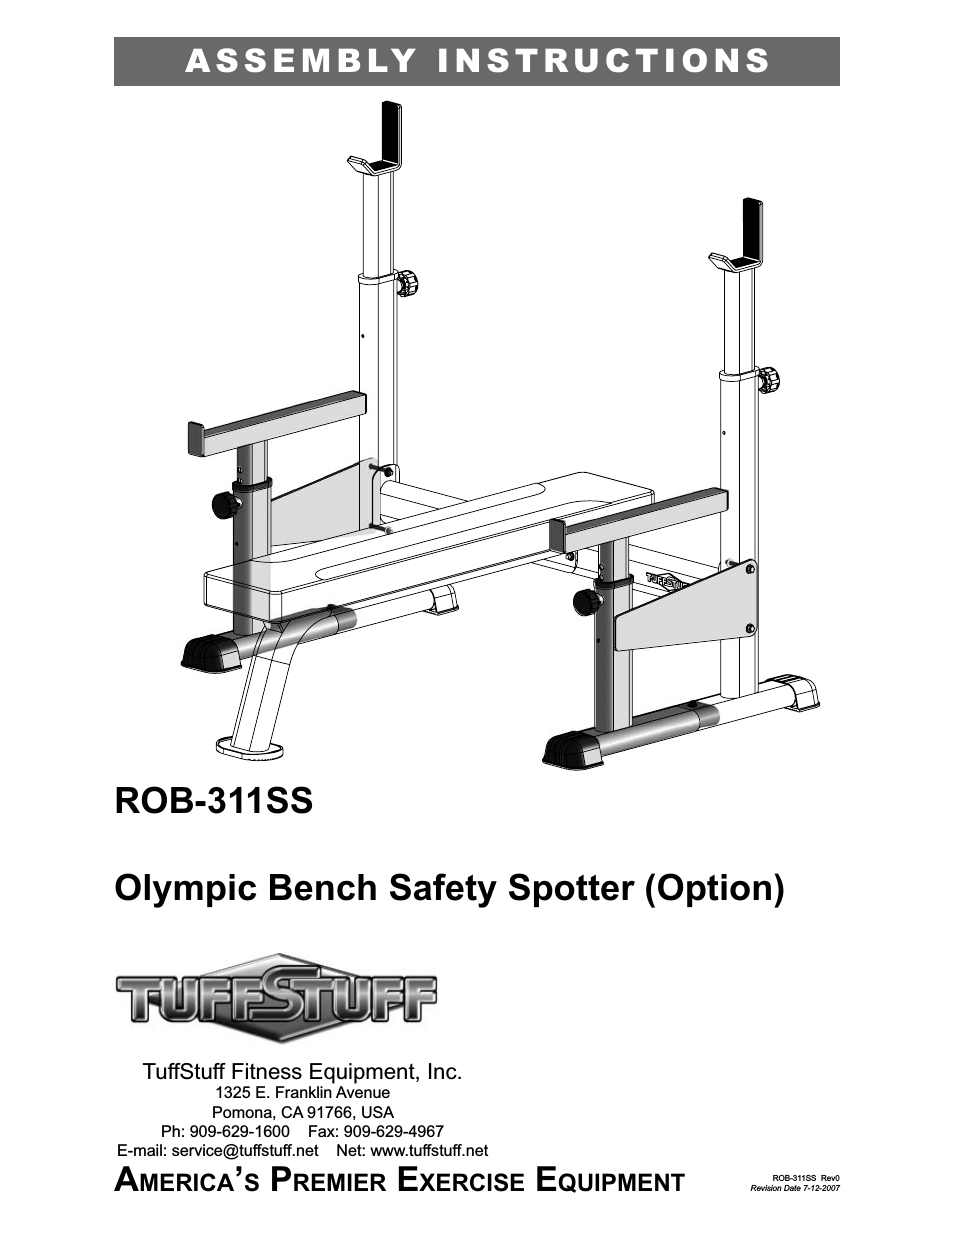 ROB-311SS Safety Spotter for ROB-311 (Pair)